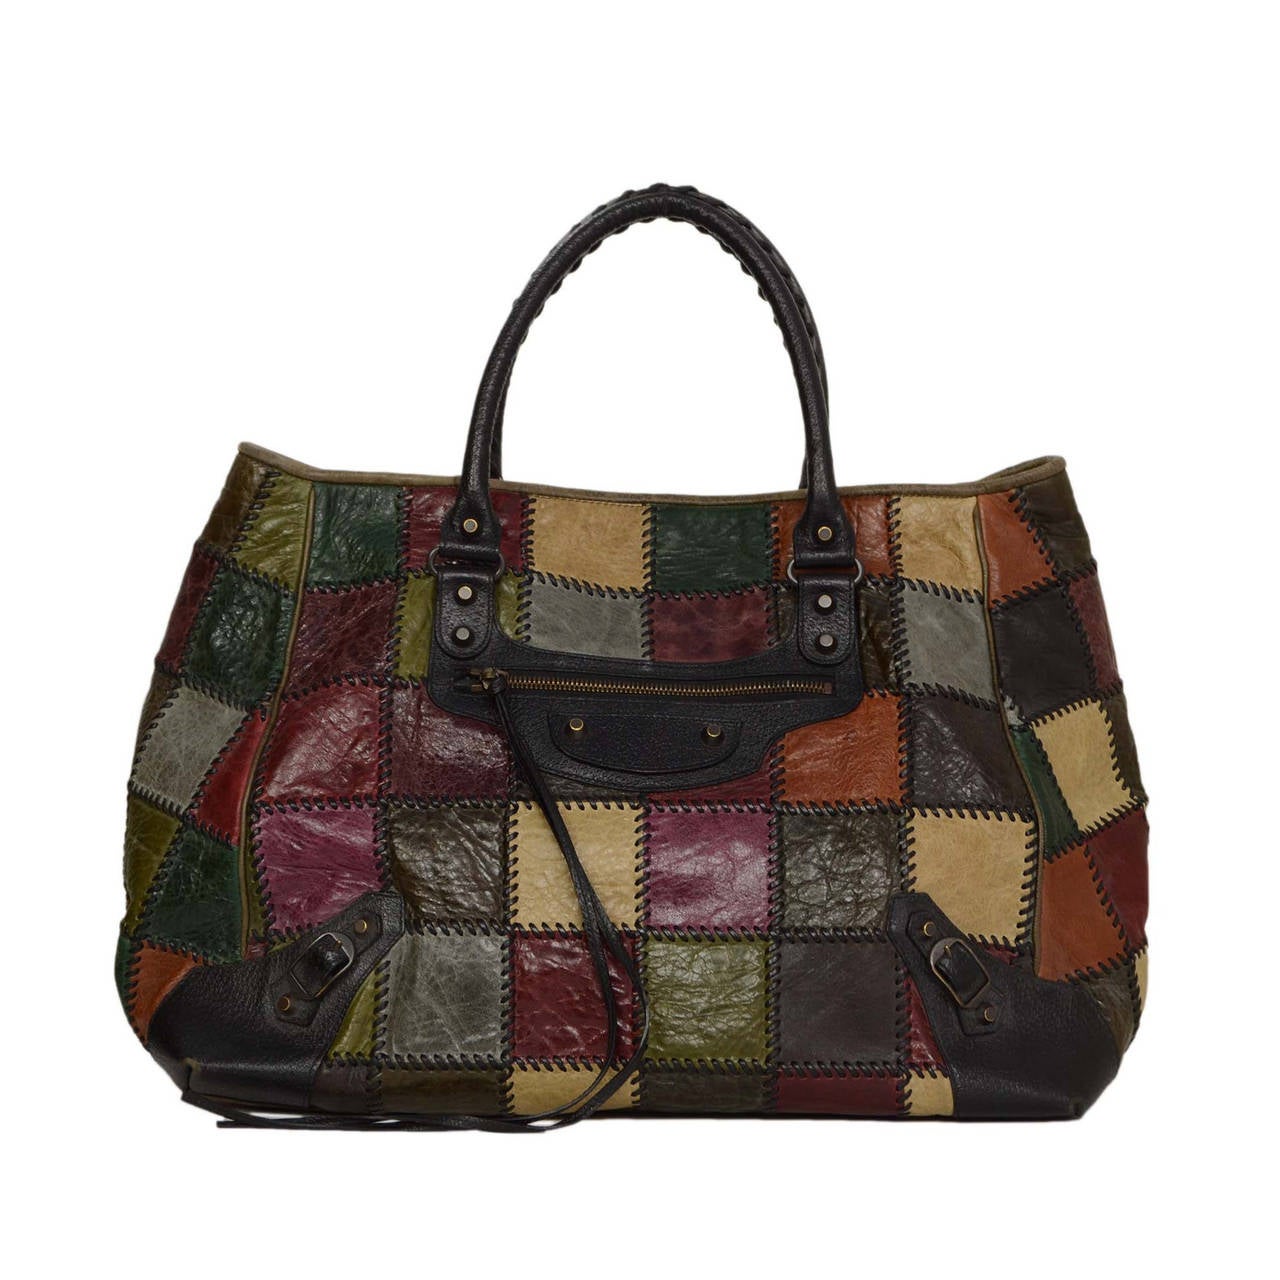 BALENCIAGA Multi-Color Leather Patchwork &quot;Arena&quot; Bag BHW at 1stdibs